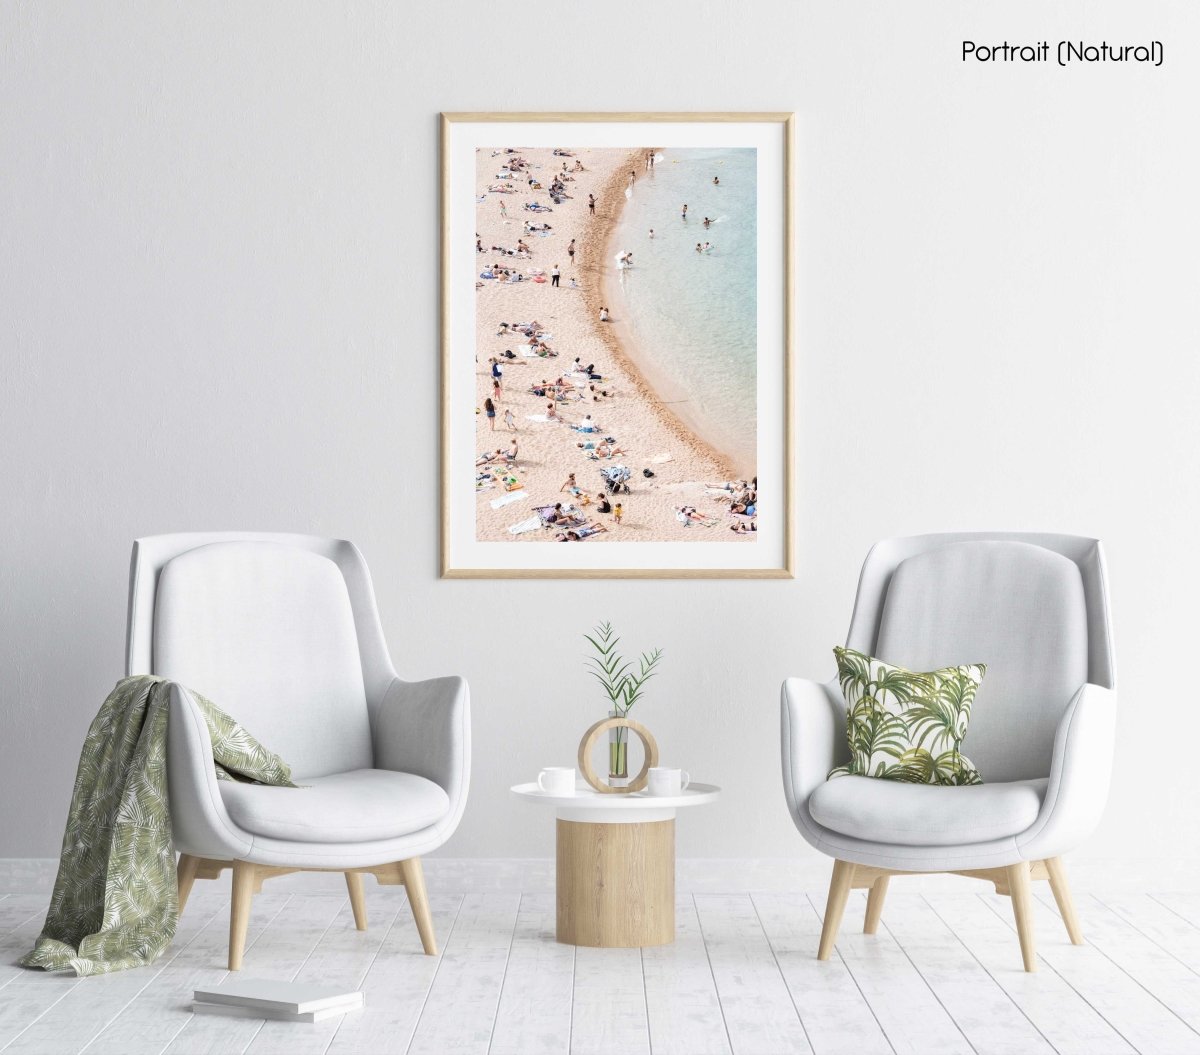 Light colors of people swimming at Tossa de Mar beach in a natural fine art frame